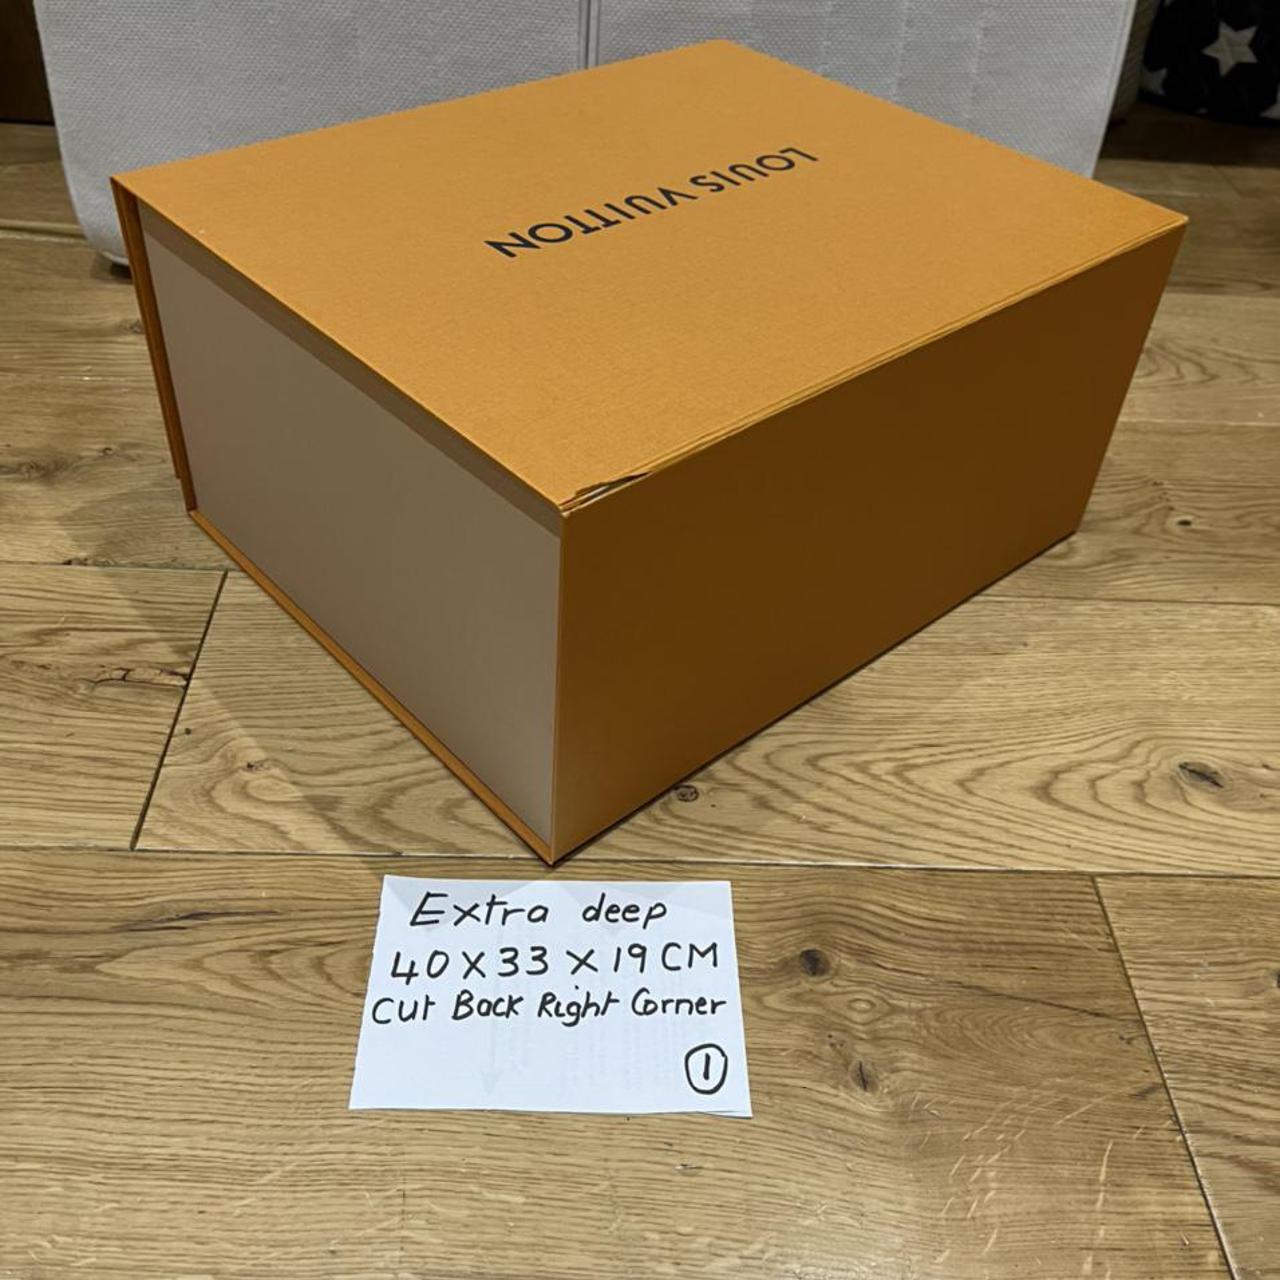 Louis Vuitton Gift Box with Magnetic Flap - Empty - Depop